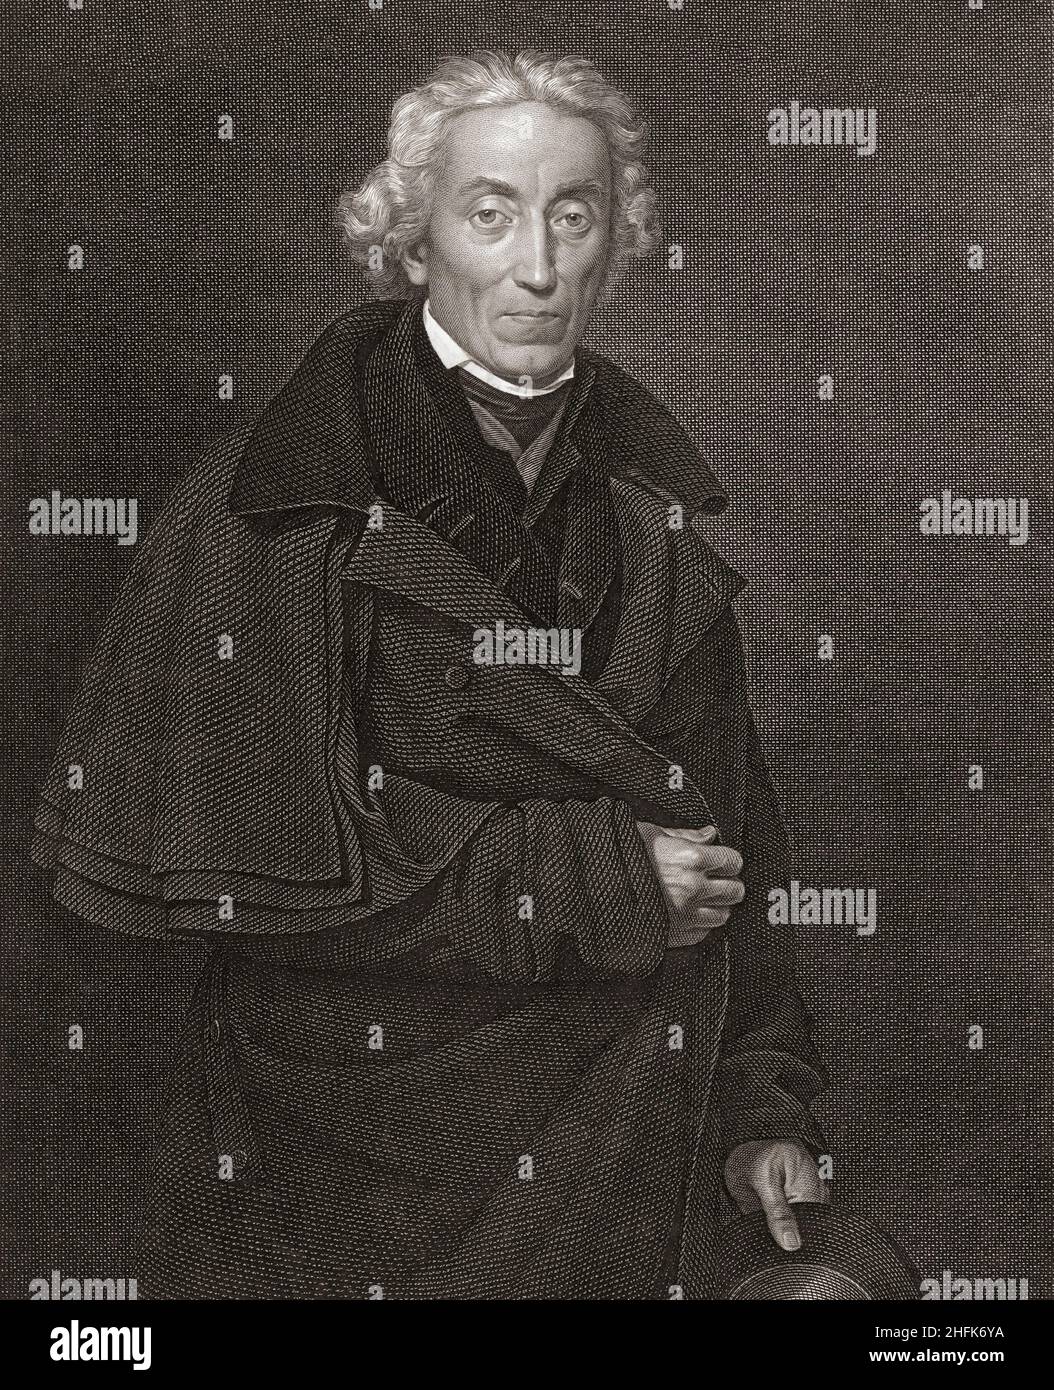 Josef Dobrovský, 1753 – 1829.  Czech philologist, historian and leading figure in the Czech National Revival.  After a print by Tommaso Benedetti from a work by Franz Kadlik. Stock Photo